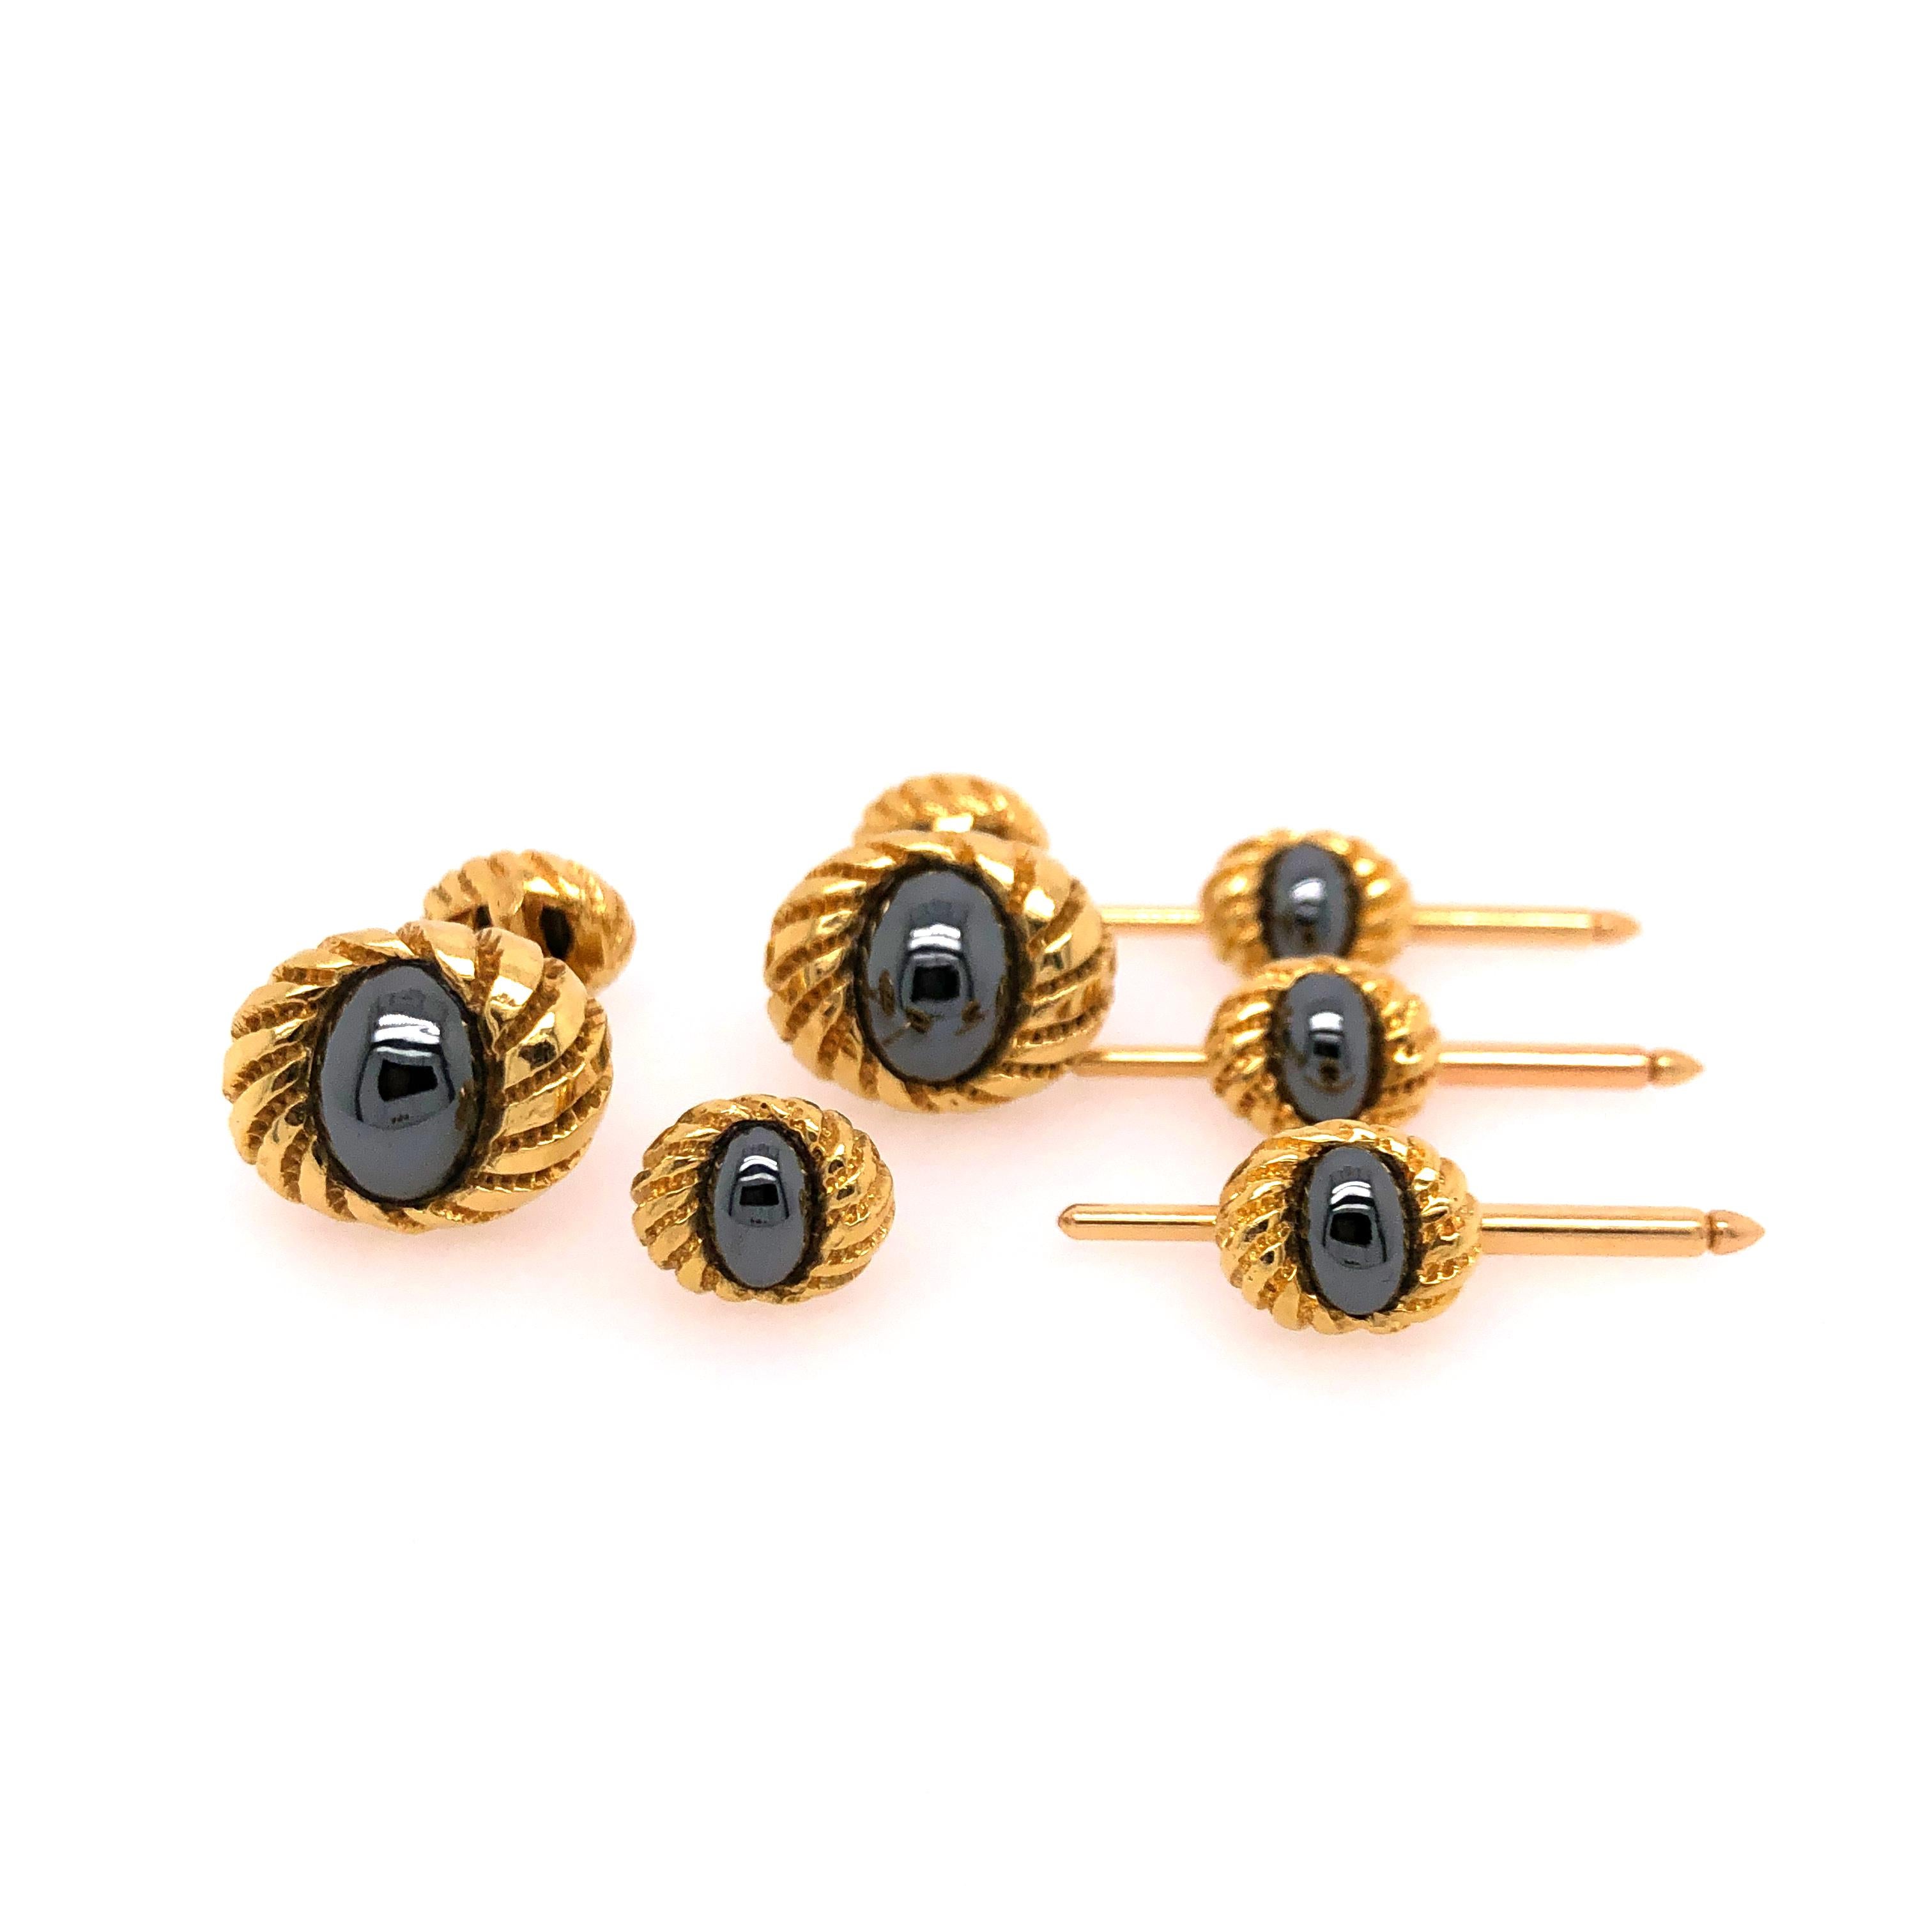 Tiffany's yellow gold 6 piece Tuxedo Set includes two cufflinks and 4 buttons. The oval hematite stones are set center in the 18K yellow gold swirled settings. 

Stamped: Tiffany 18K, Schlumberger